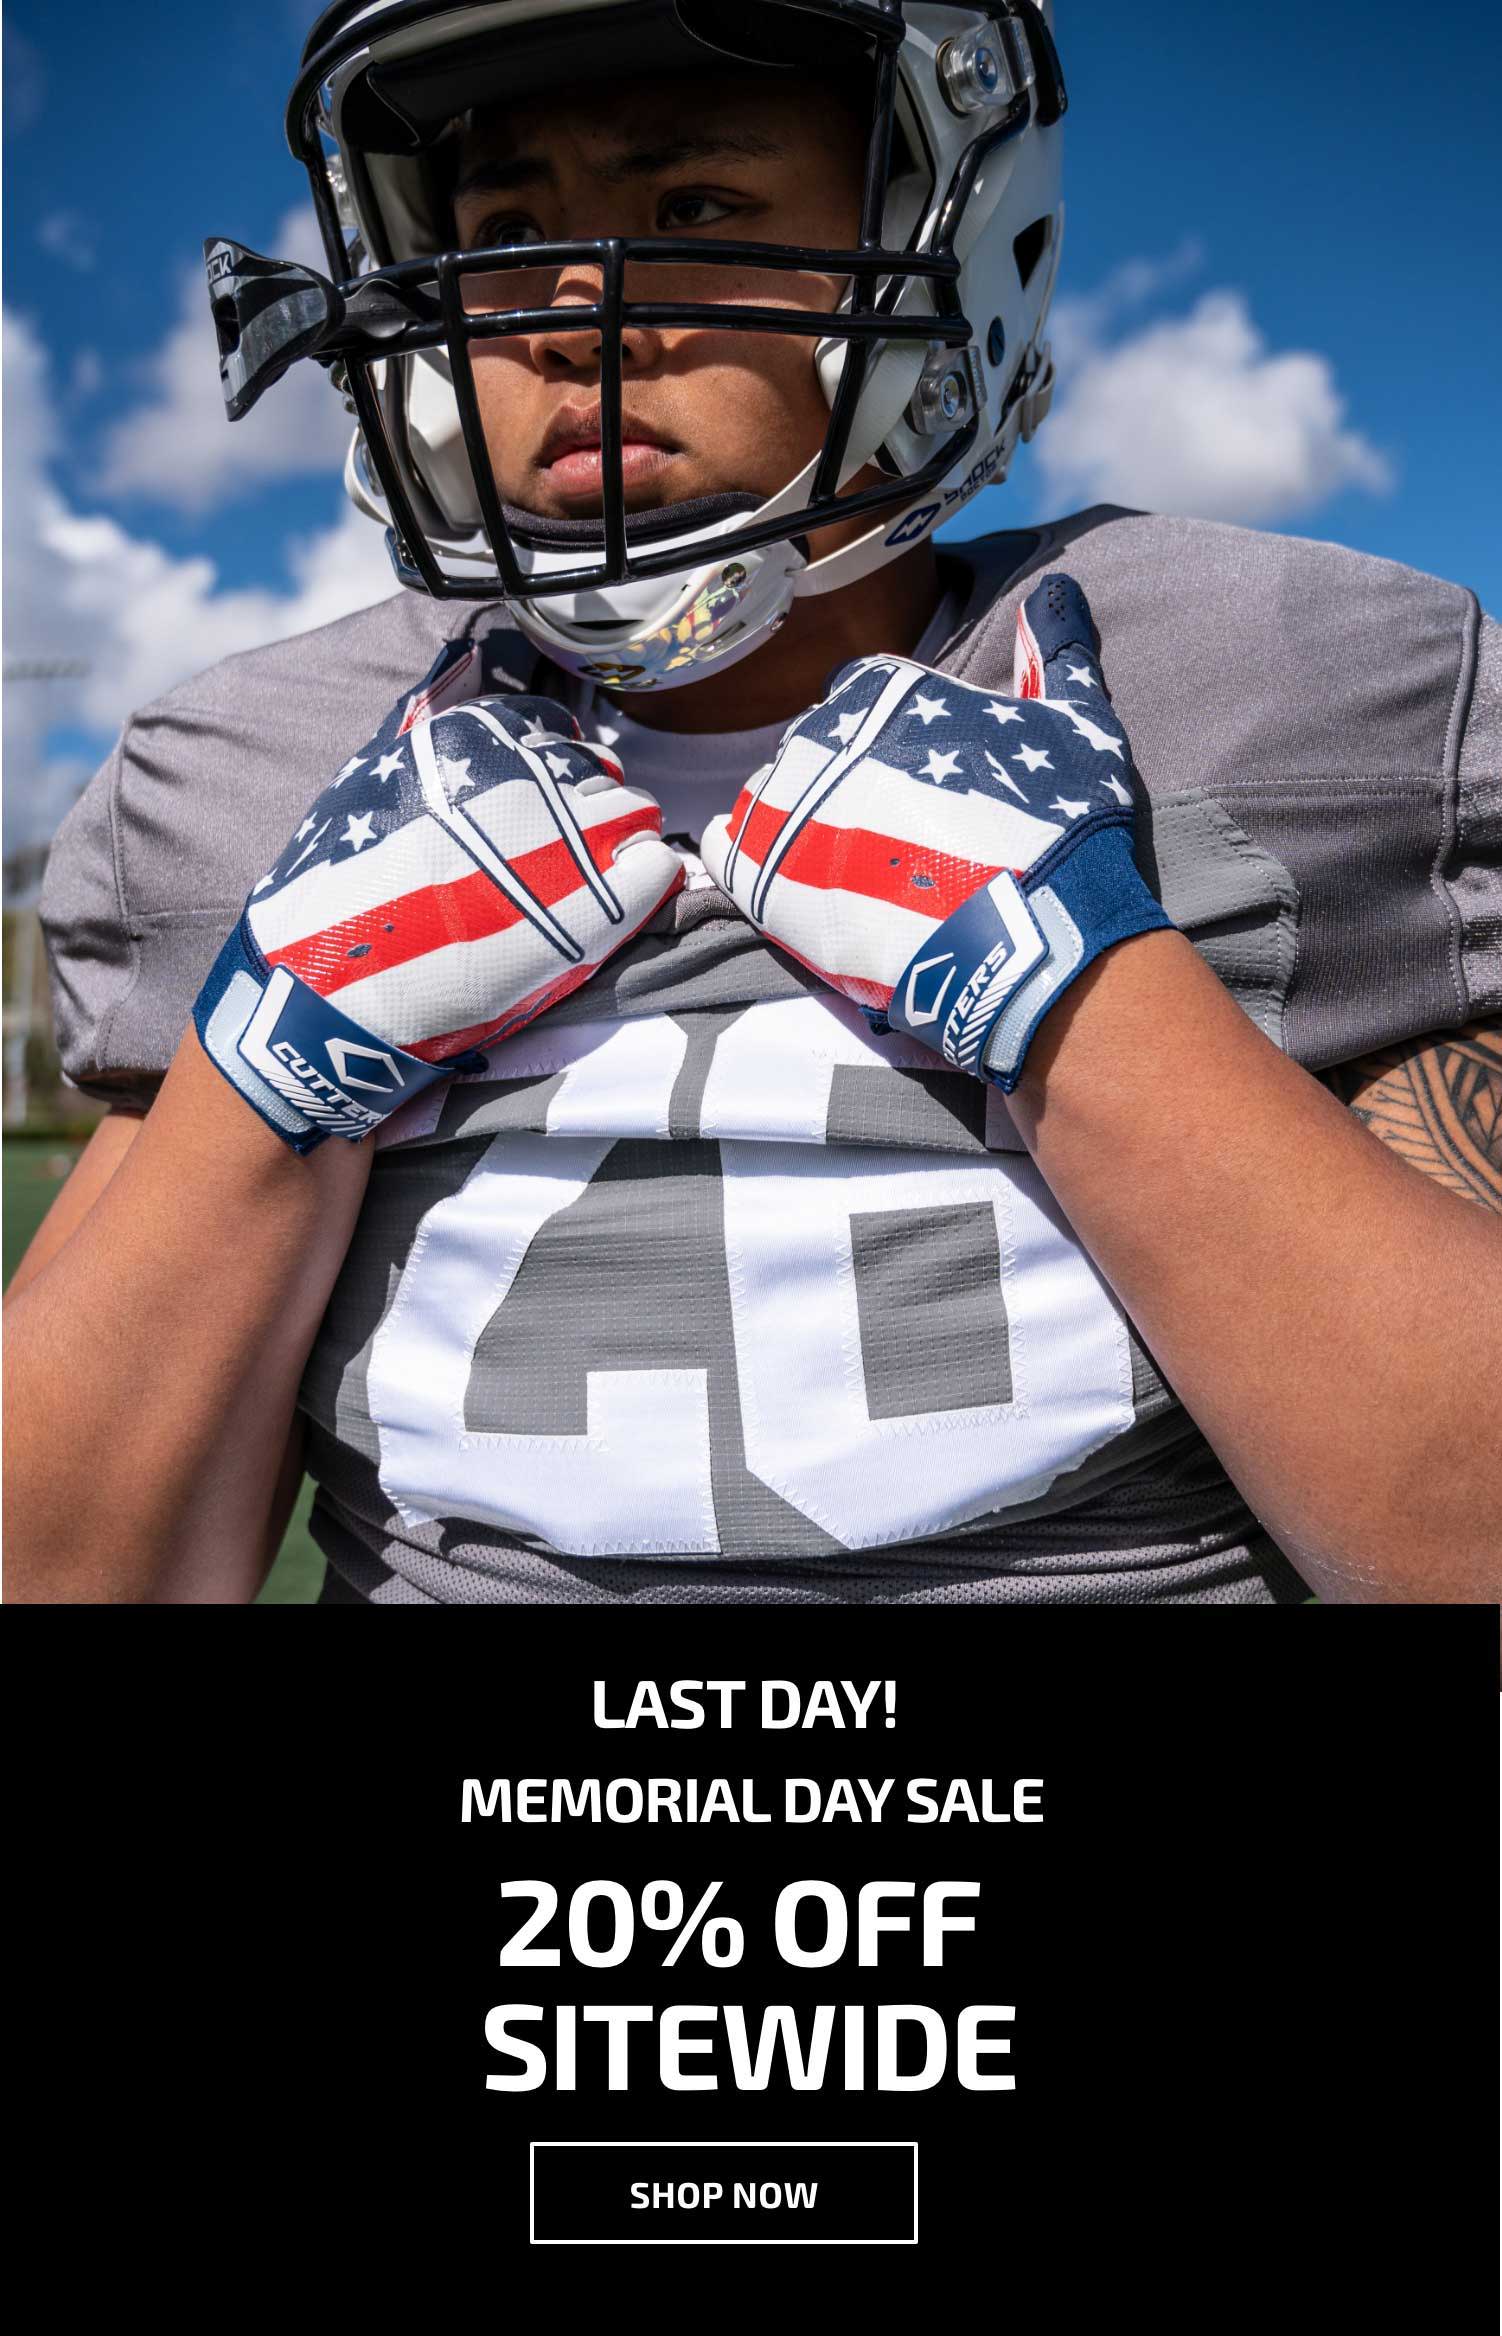 Last Day! Memorial Day Sale - 20% Off Sitewide - Shop Now